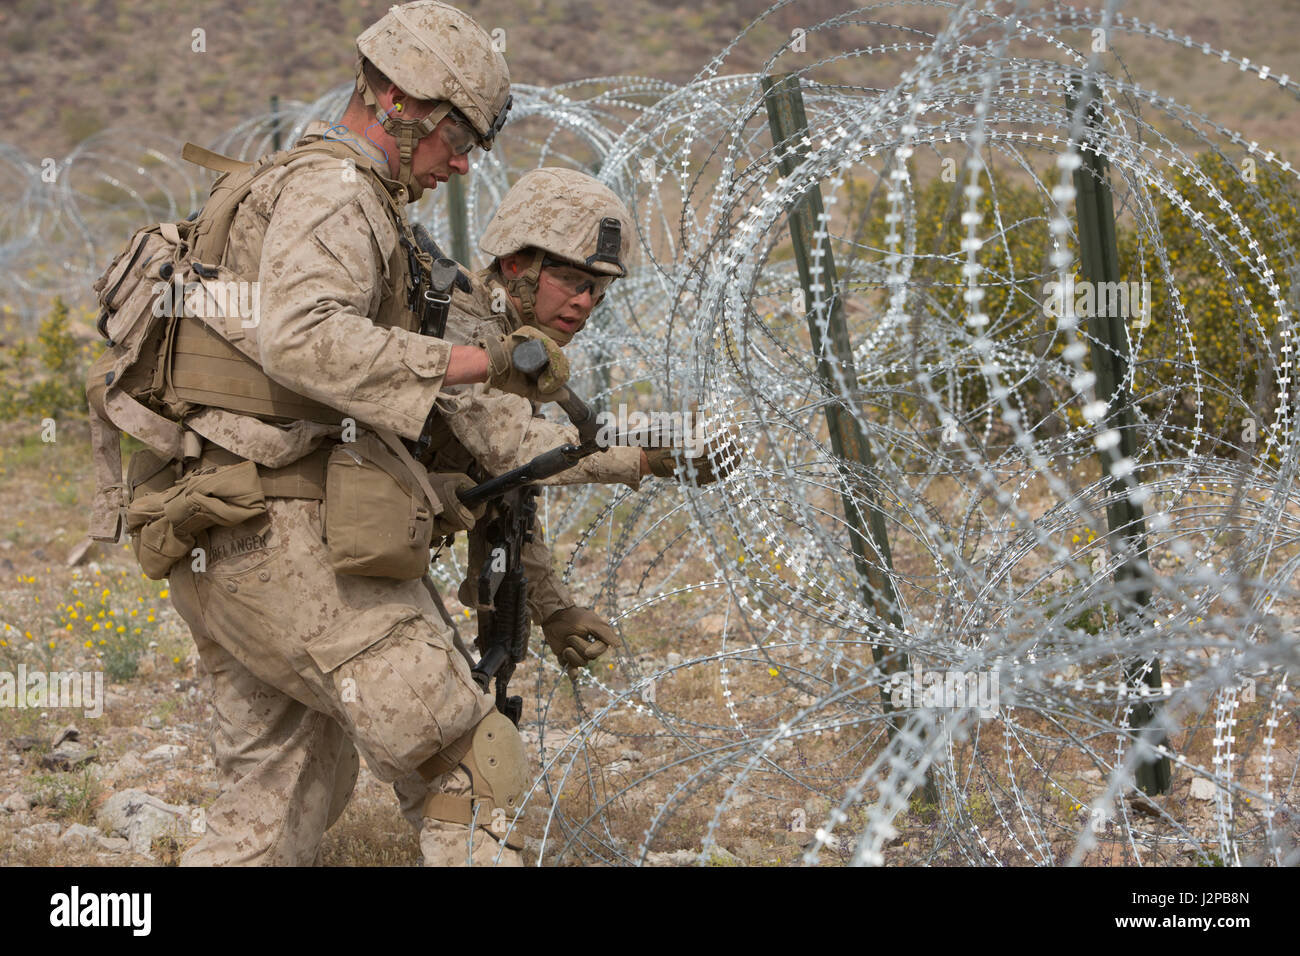 U.S. Marine Corps Lance Cpl. Robert T. Belanger, left, a combat engineer with Golf Company, 2nd Battalion, 6th Marine Regiment, 2nd Marine Division (2d MARDIV), and Lance Cpl. Tyler D. Knudtson, use bolt cutters to breach simulated enemy concertina wire during company-level attack live fire training at Range 400 for Talon Exercise (TalonEx) 2-17, Marine Corps Air Ground Combat Center, Twentynine Palms, C.A., April 9, 2017. The purpose of TalonEx was for ground combat units to conduct integrated training in support of the Weapons and Tactics Instructor Course (WTI) 2-17 hosted by Marine Aviatio Stock Photo